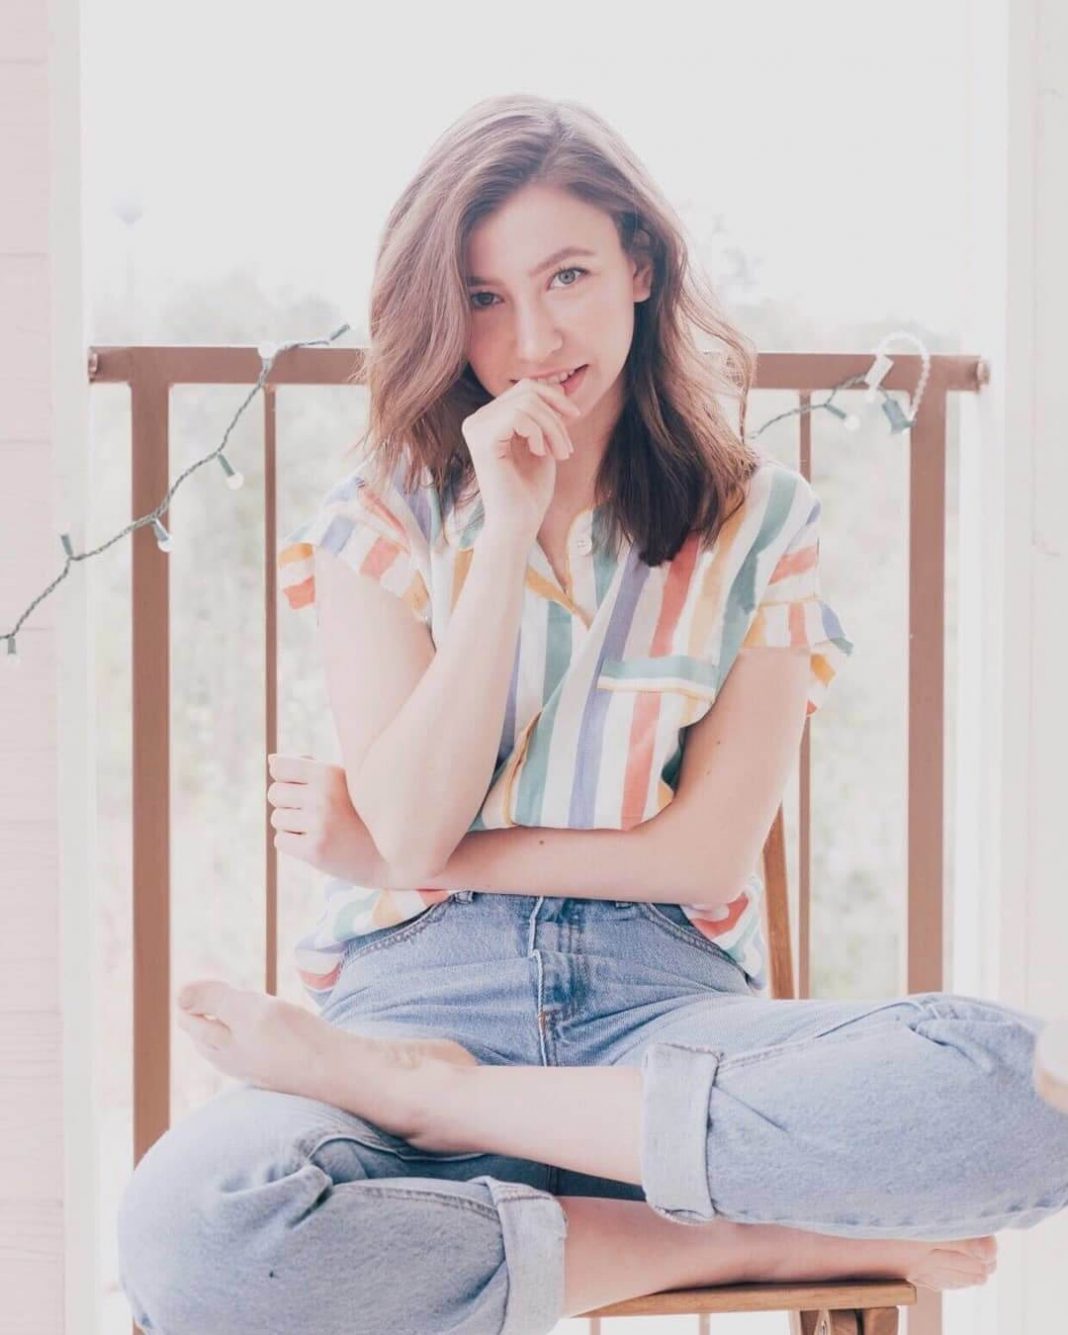 50 Katelyn Nacon Nude Pictures Which Prove Beauty Beyond Recognition 7